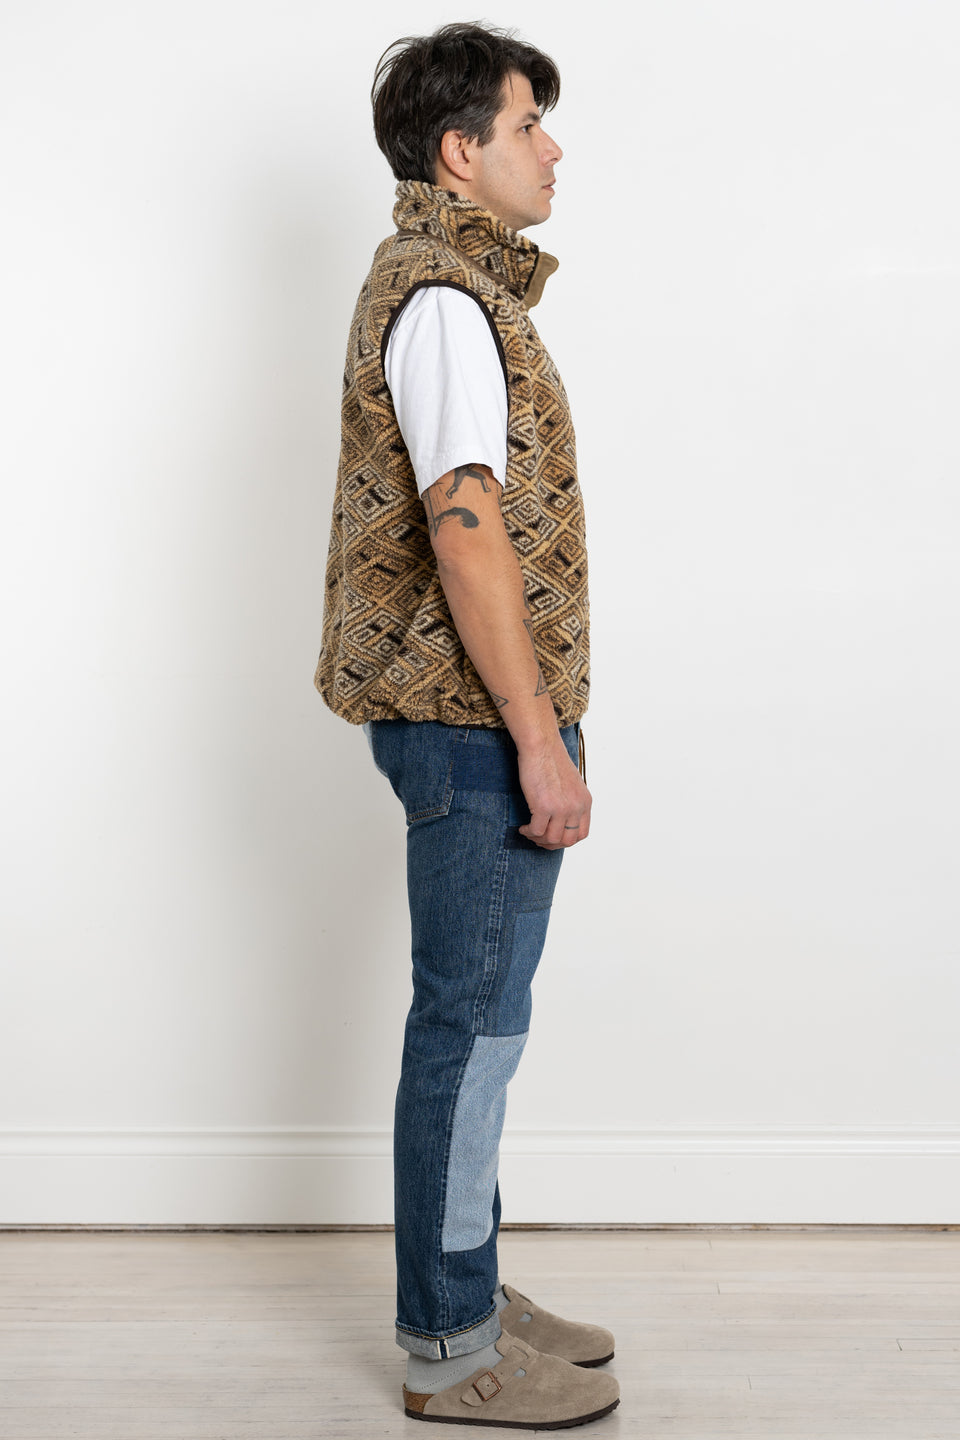 orSlow Japan 23AW FW23 Men's Collection African Pattern Boa Fleece Vest Calculus Victoria BC Canada